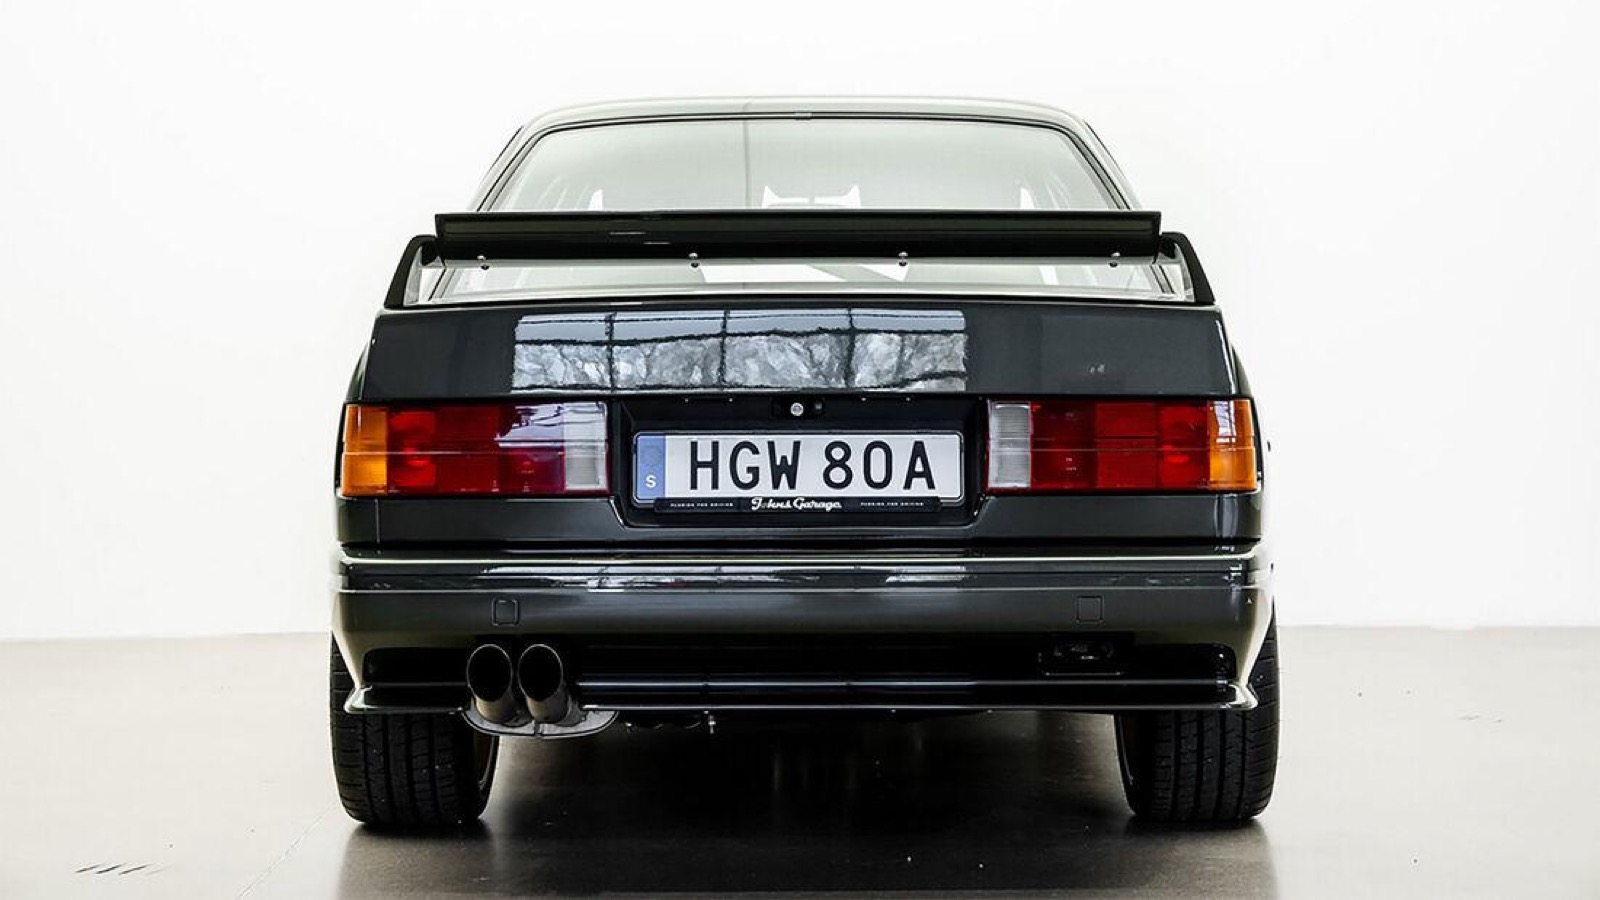 This is the most brilliant BMW M3 of all time - Pledge Times